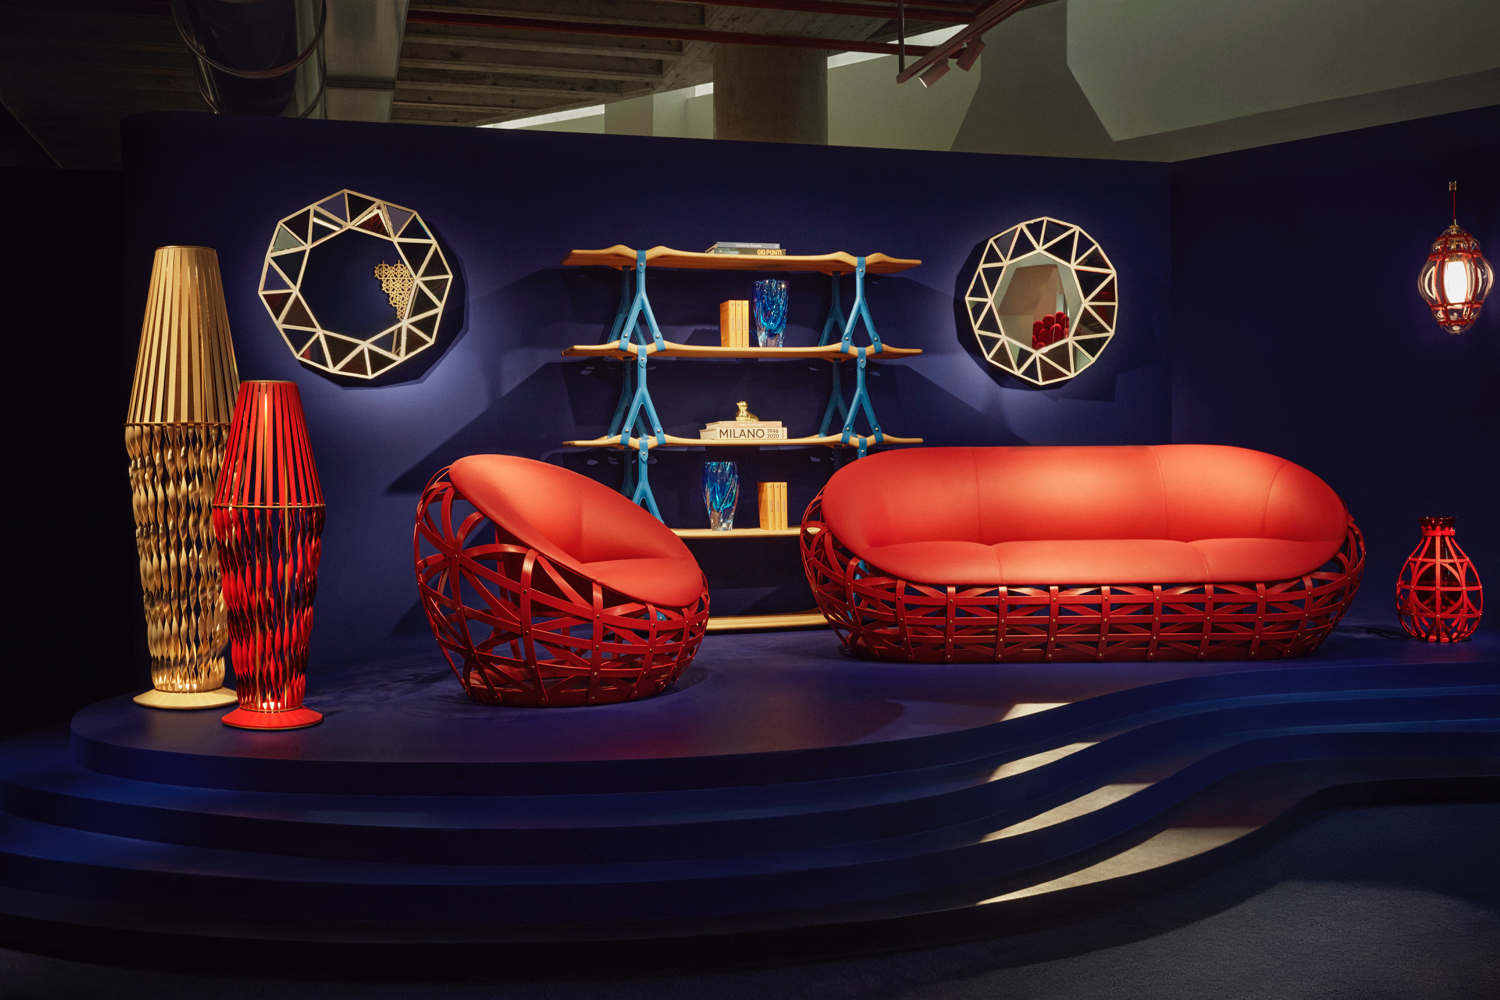 Louis Vuitton arrives at the Salone del Mobile with a new